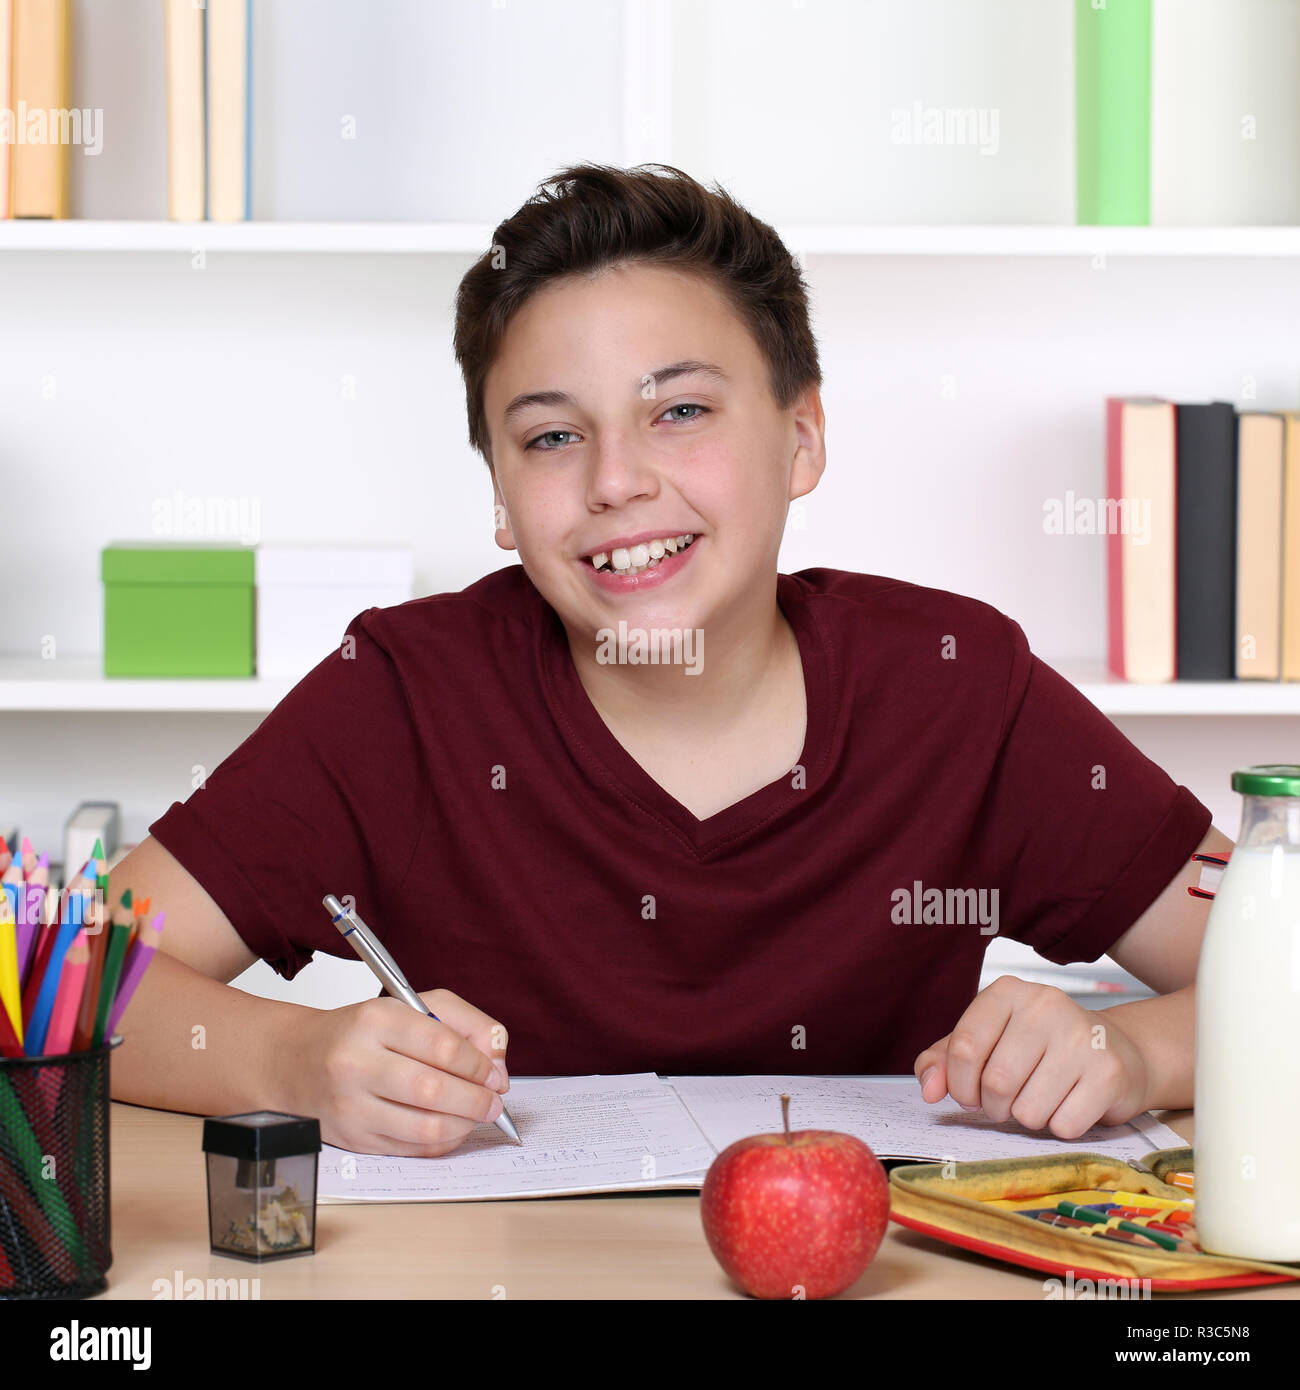 laughing boy with learning at school Stock Photo